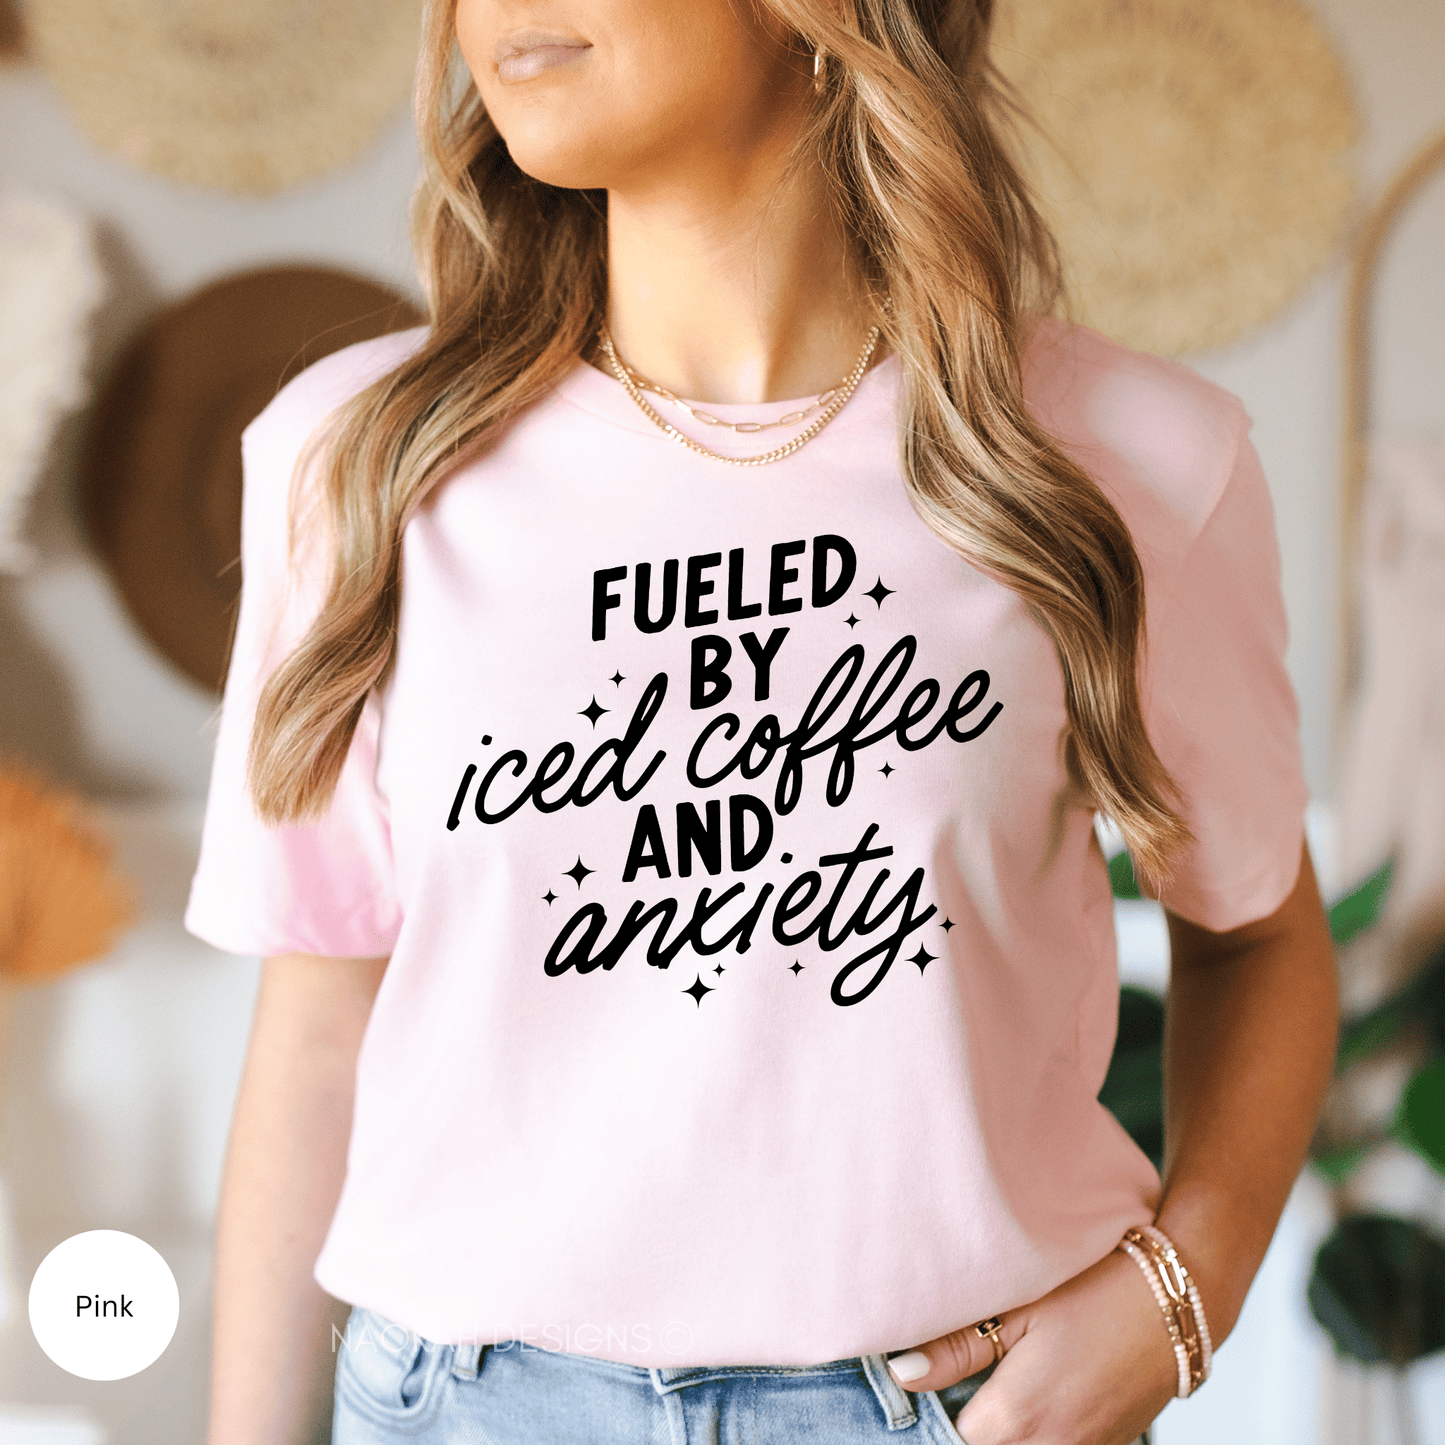 fueled by iced coffee and anxiety shirt, iced coffee addict shirt, mental health shirt, anxiety shirt, overstimulated moms club shirt